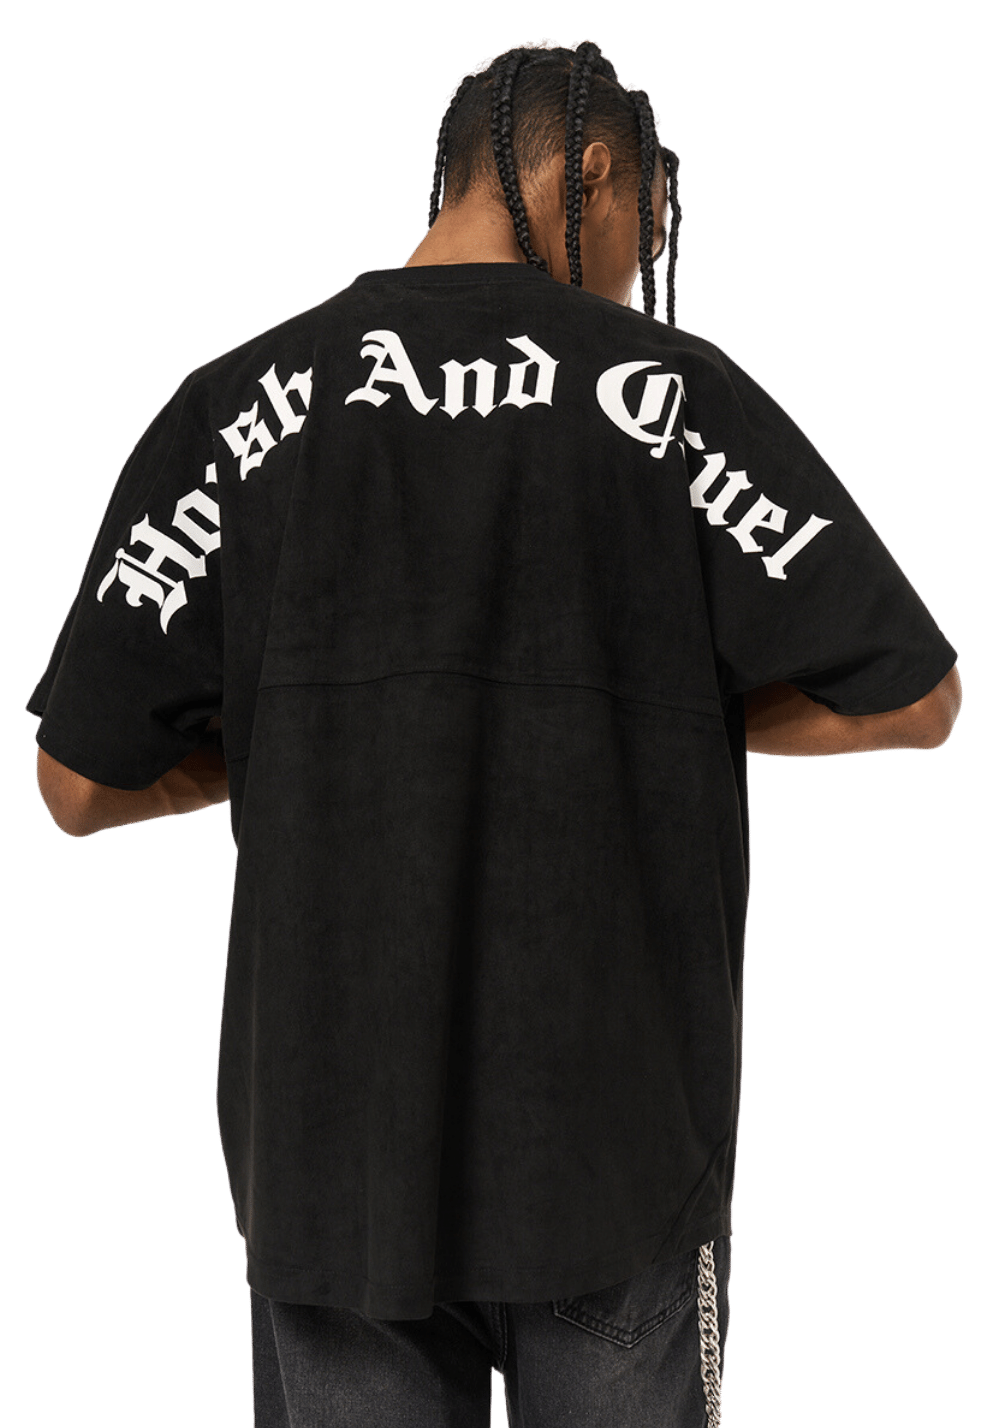 Gothic Logo Suede Tee - PSYLOS 1, Gothic Logo Suede Tee, T-Shirt, HARSH AND CRUEL, PSYLOS 1